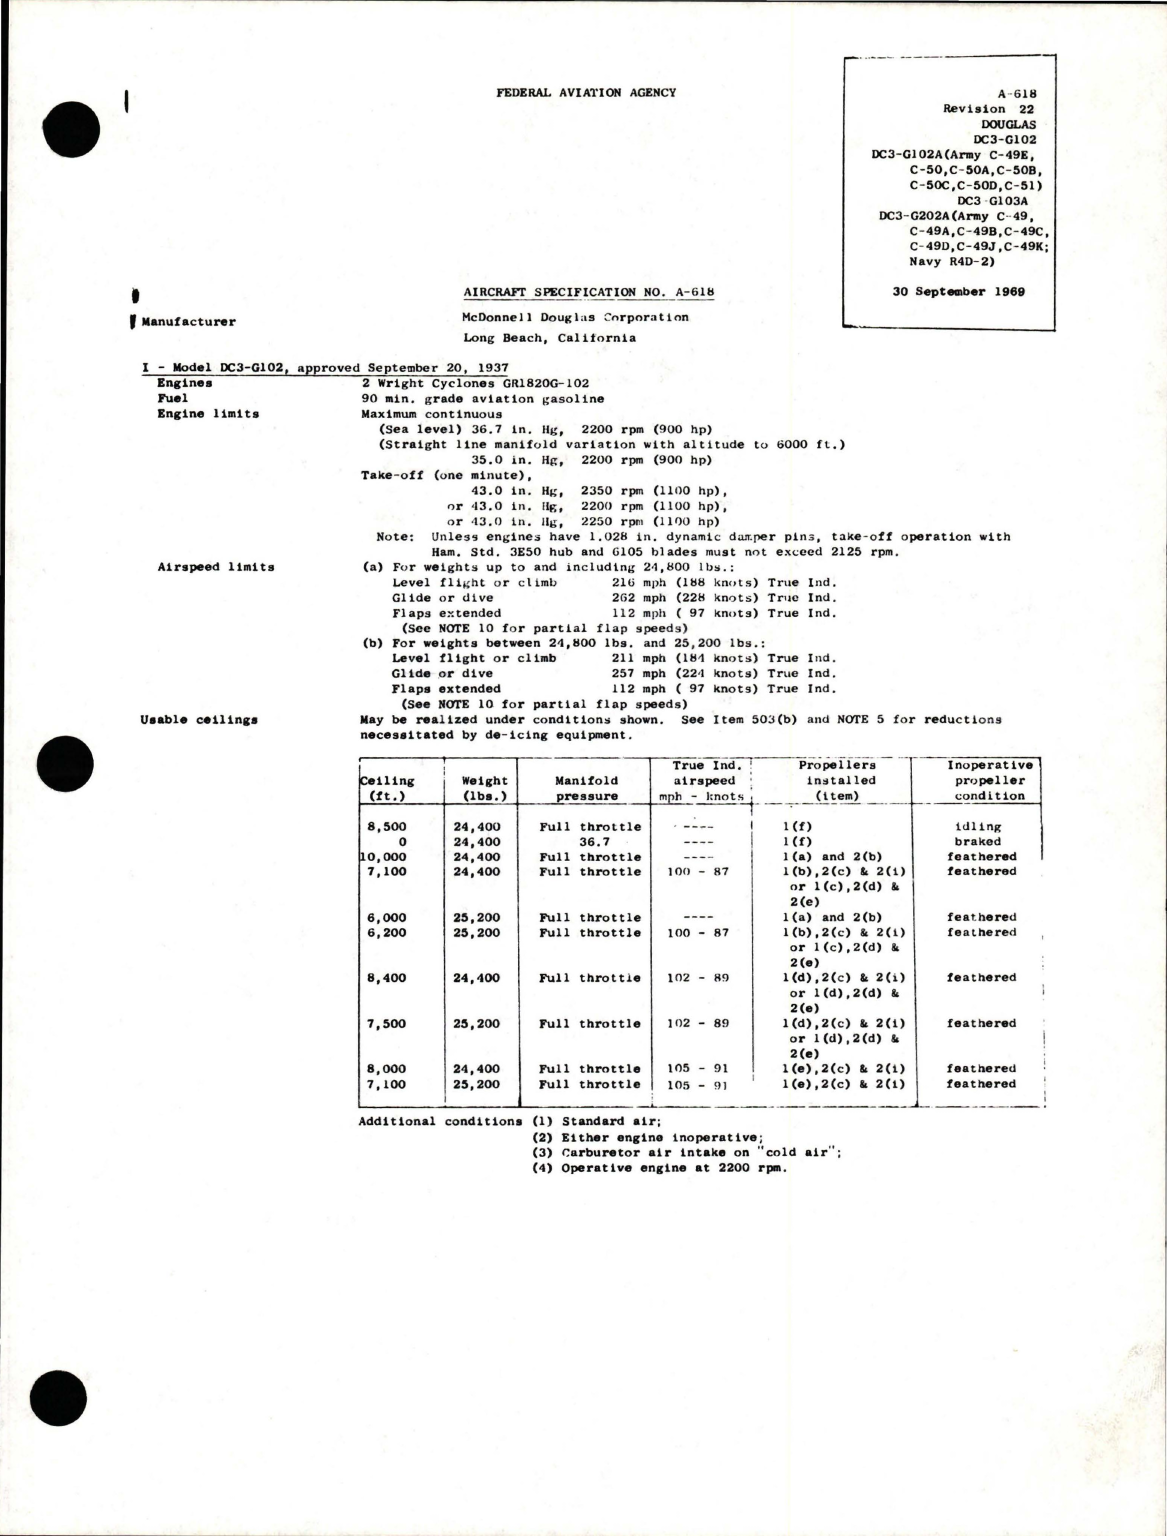 Sample page 1 from AirCorps Library document: DC3-G102, DC3-G102A (C-49E, C-50, C-51), DC3-G103A, DC3-G202A (C-49) R4D-2